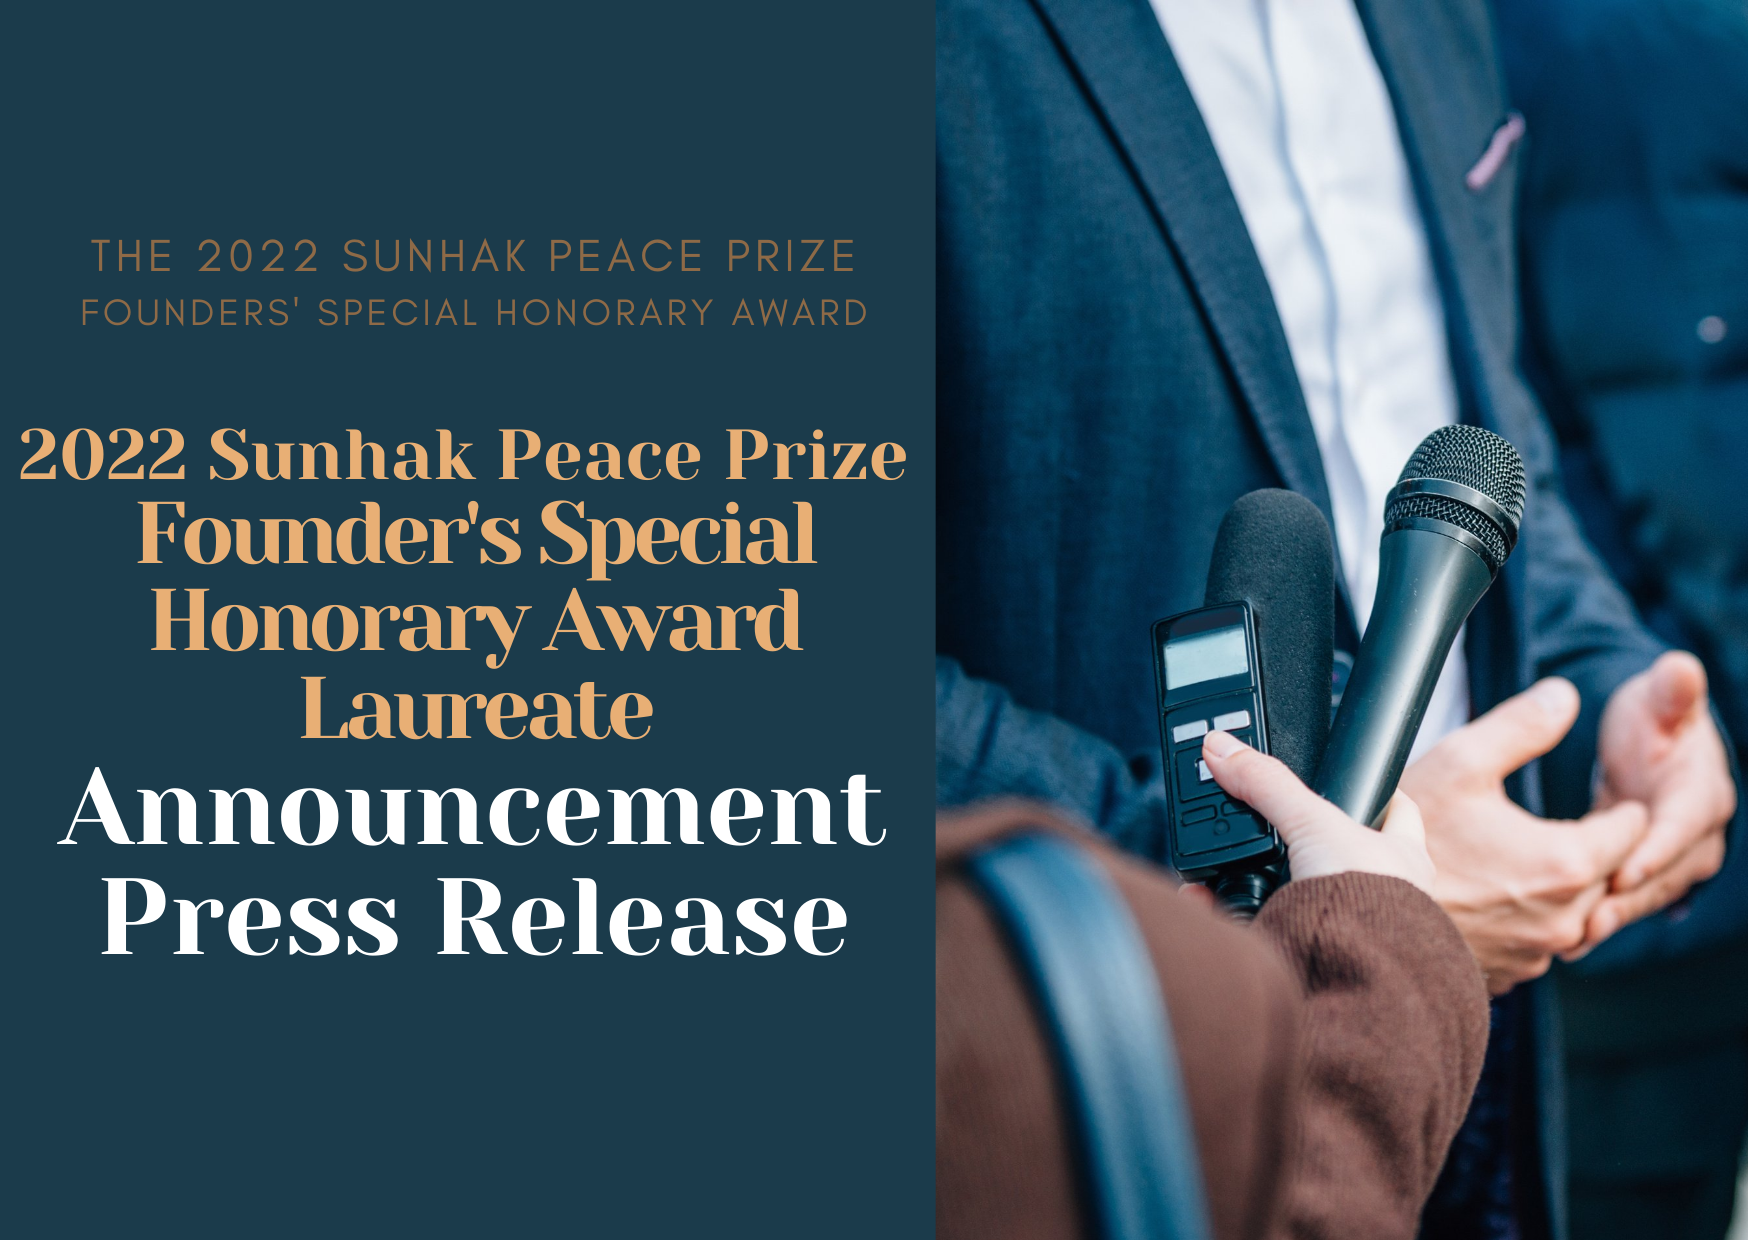 2022 Sunhak Peace Prize Founders' Special Honorary Award Laureates Announcement Press Release 썸네일